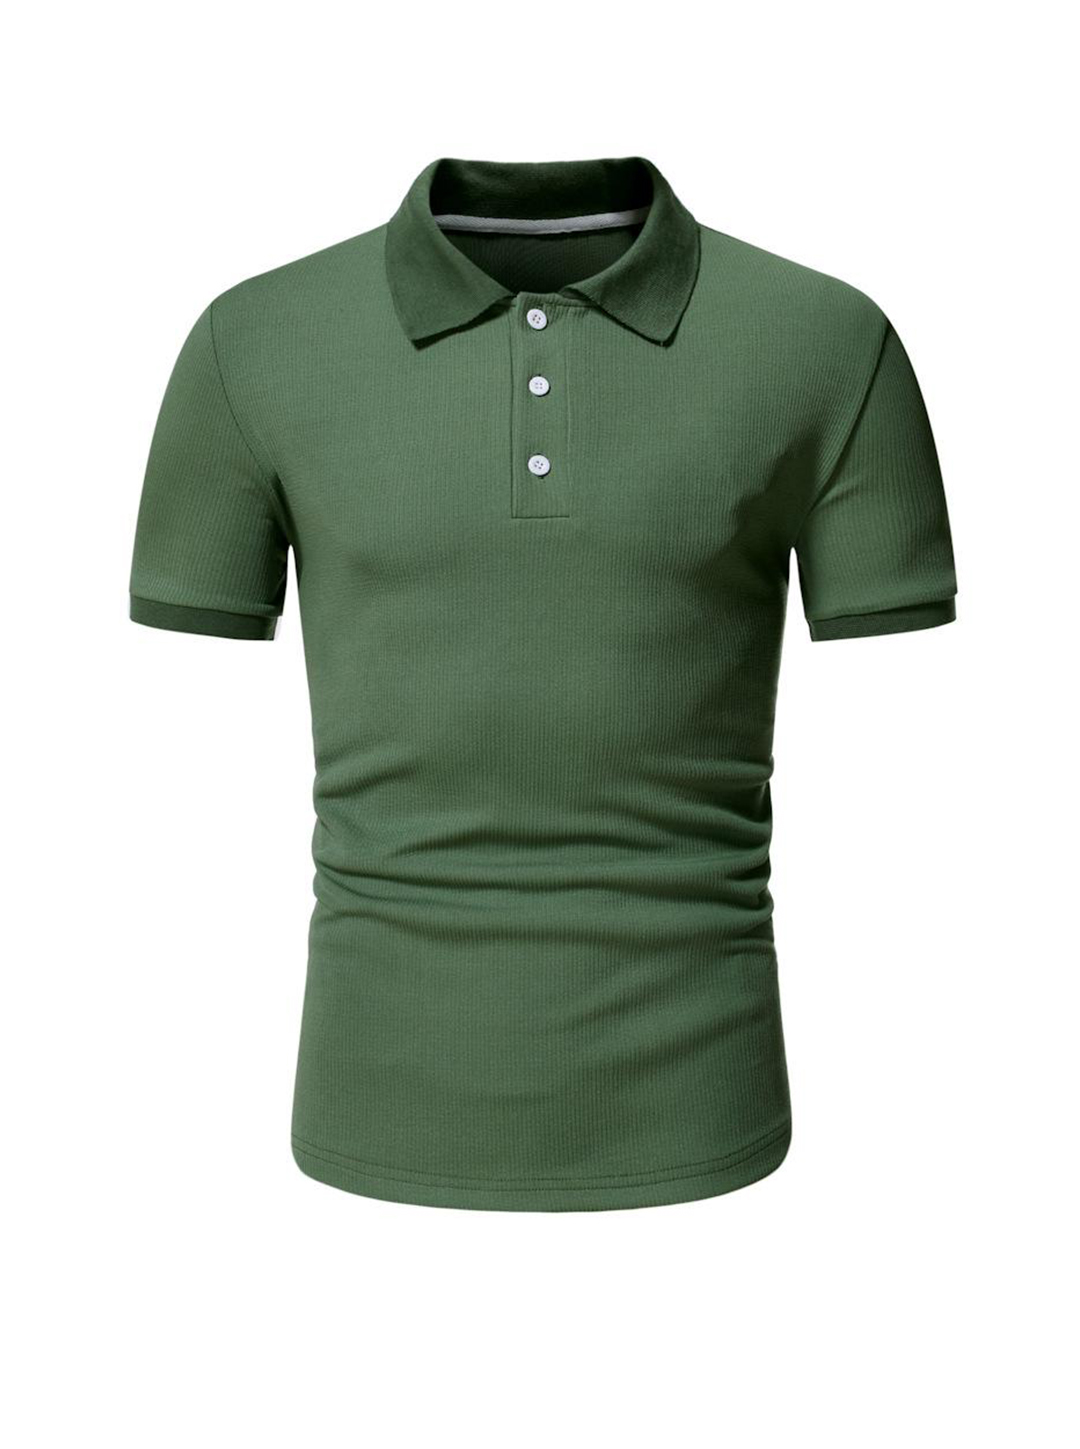 Larry Textured Fabric Solid Color Short-sleeved Polo T-shirt-poisonstreetwear.com